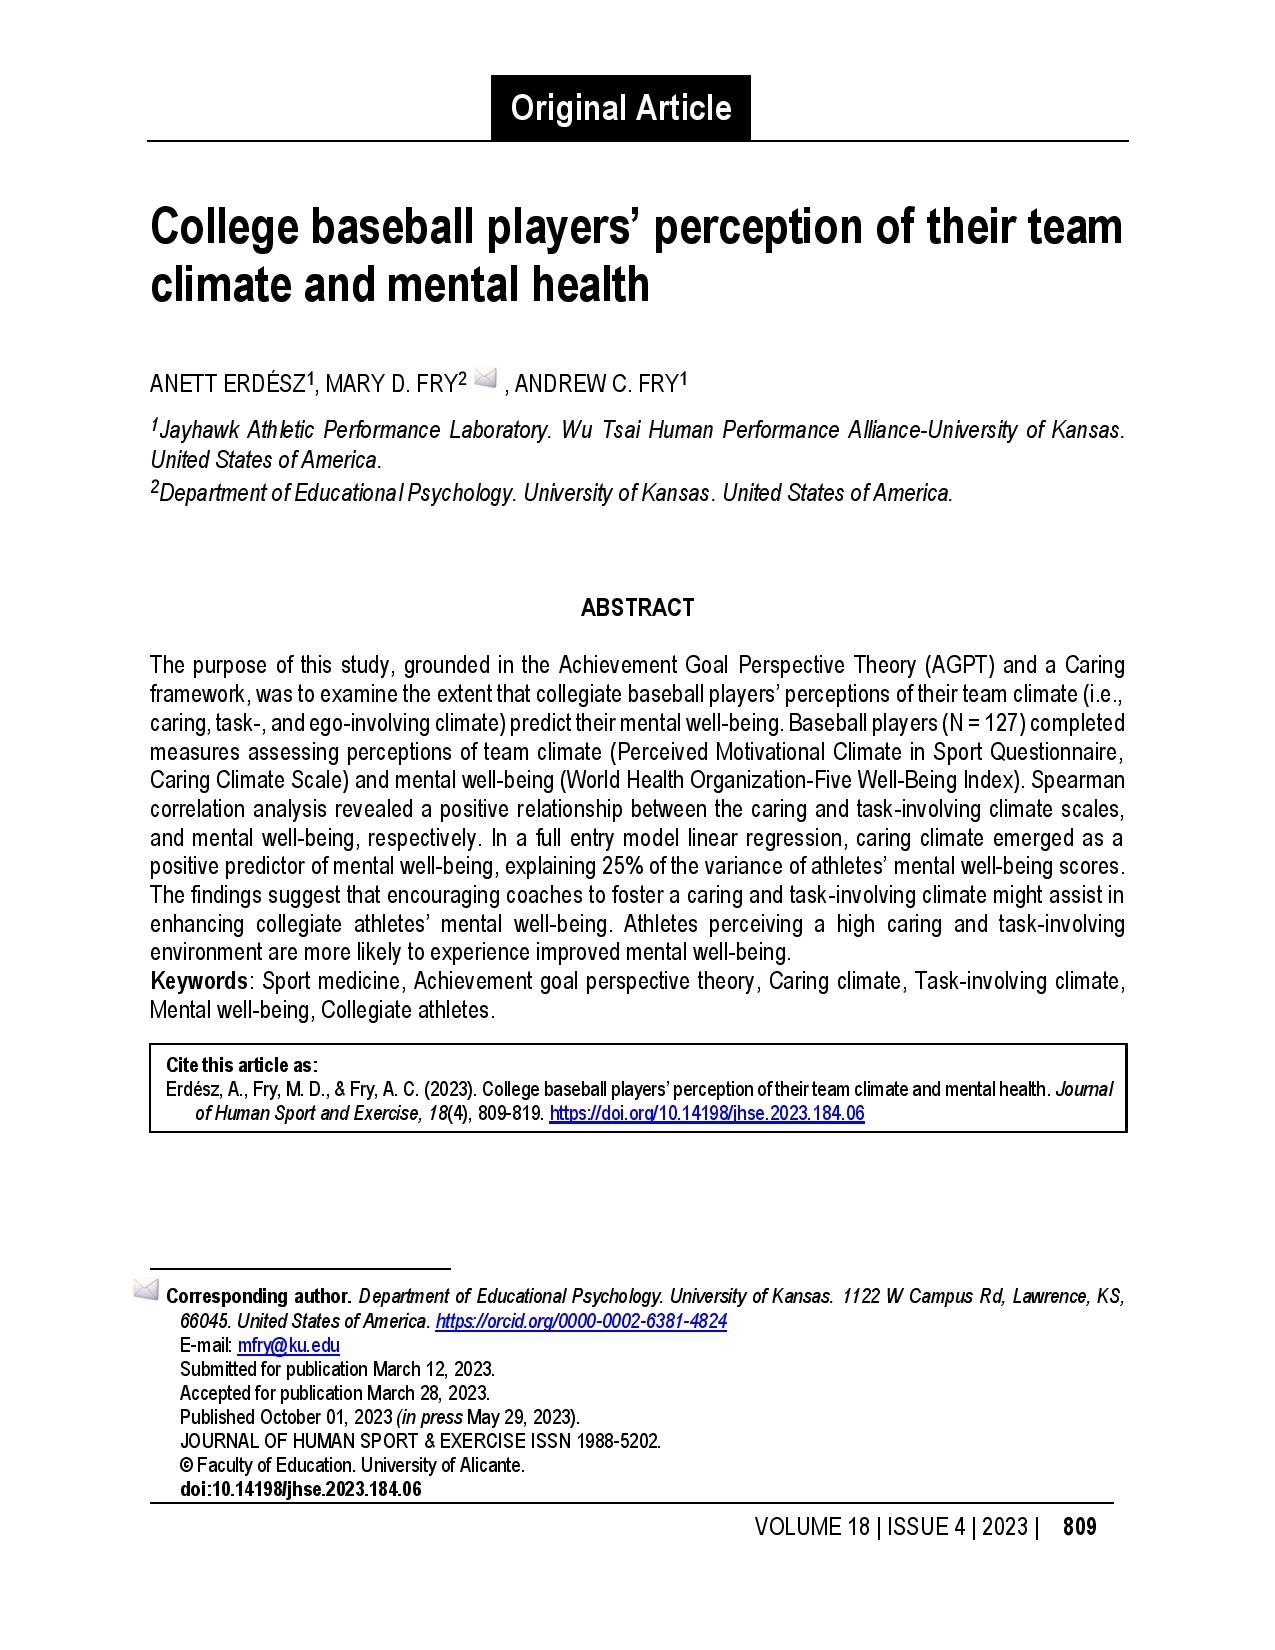 College baseball players’ perception of their team climate and mental health